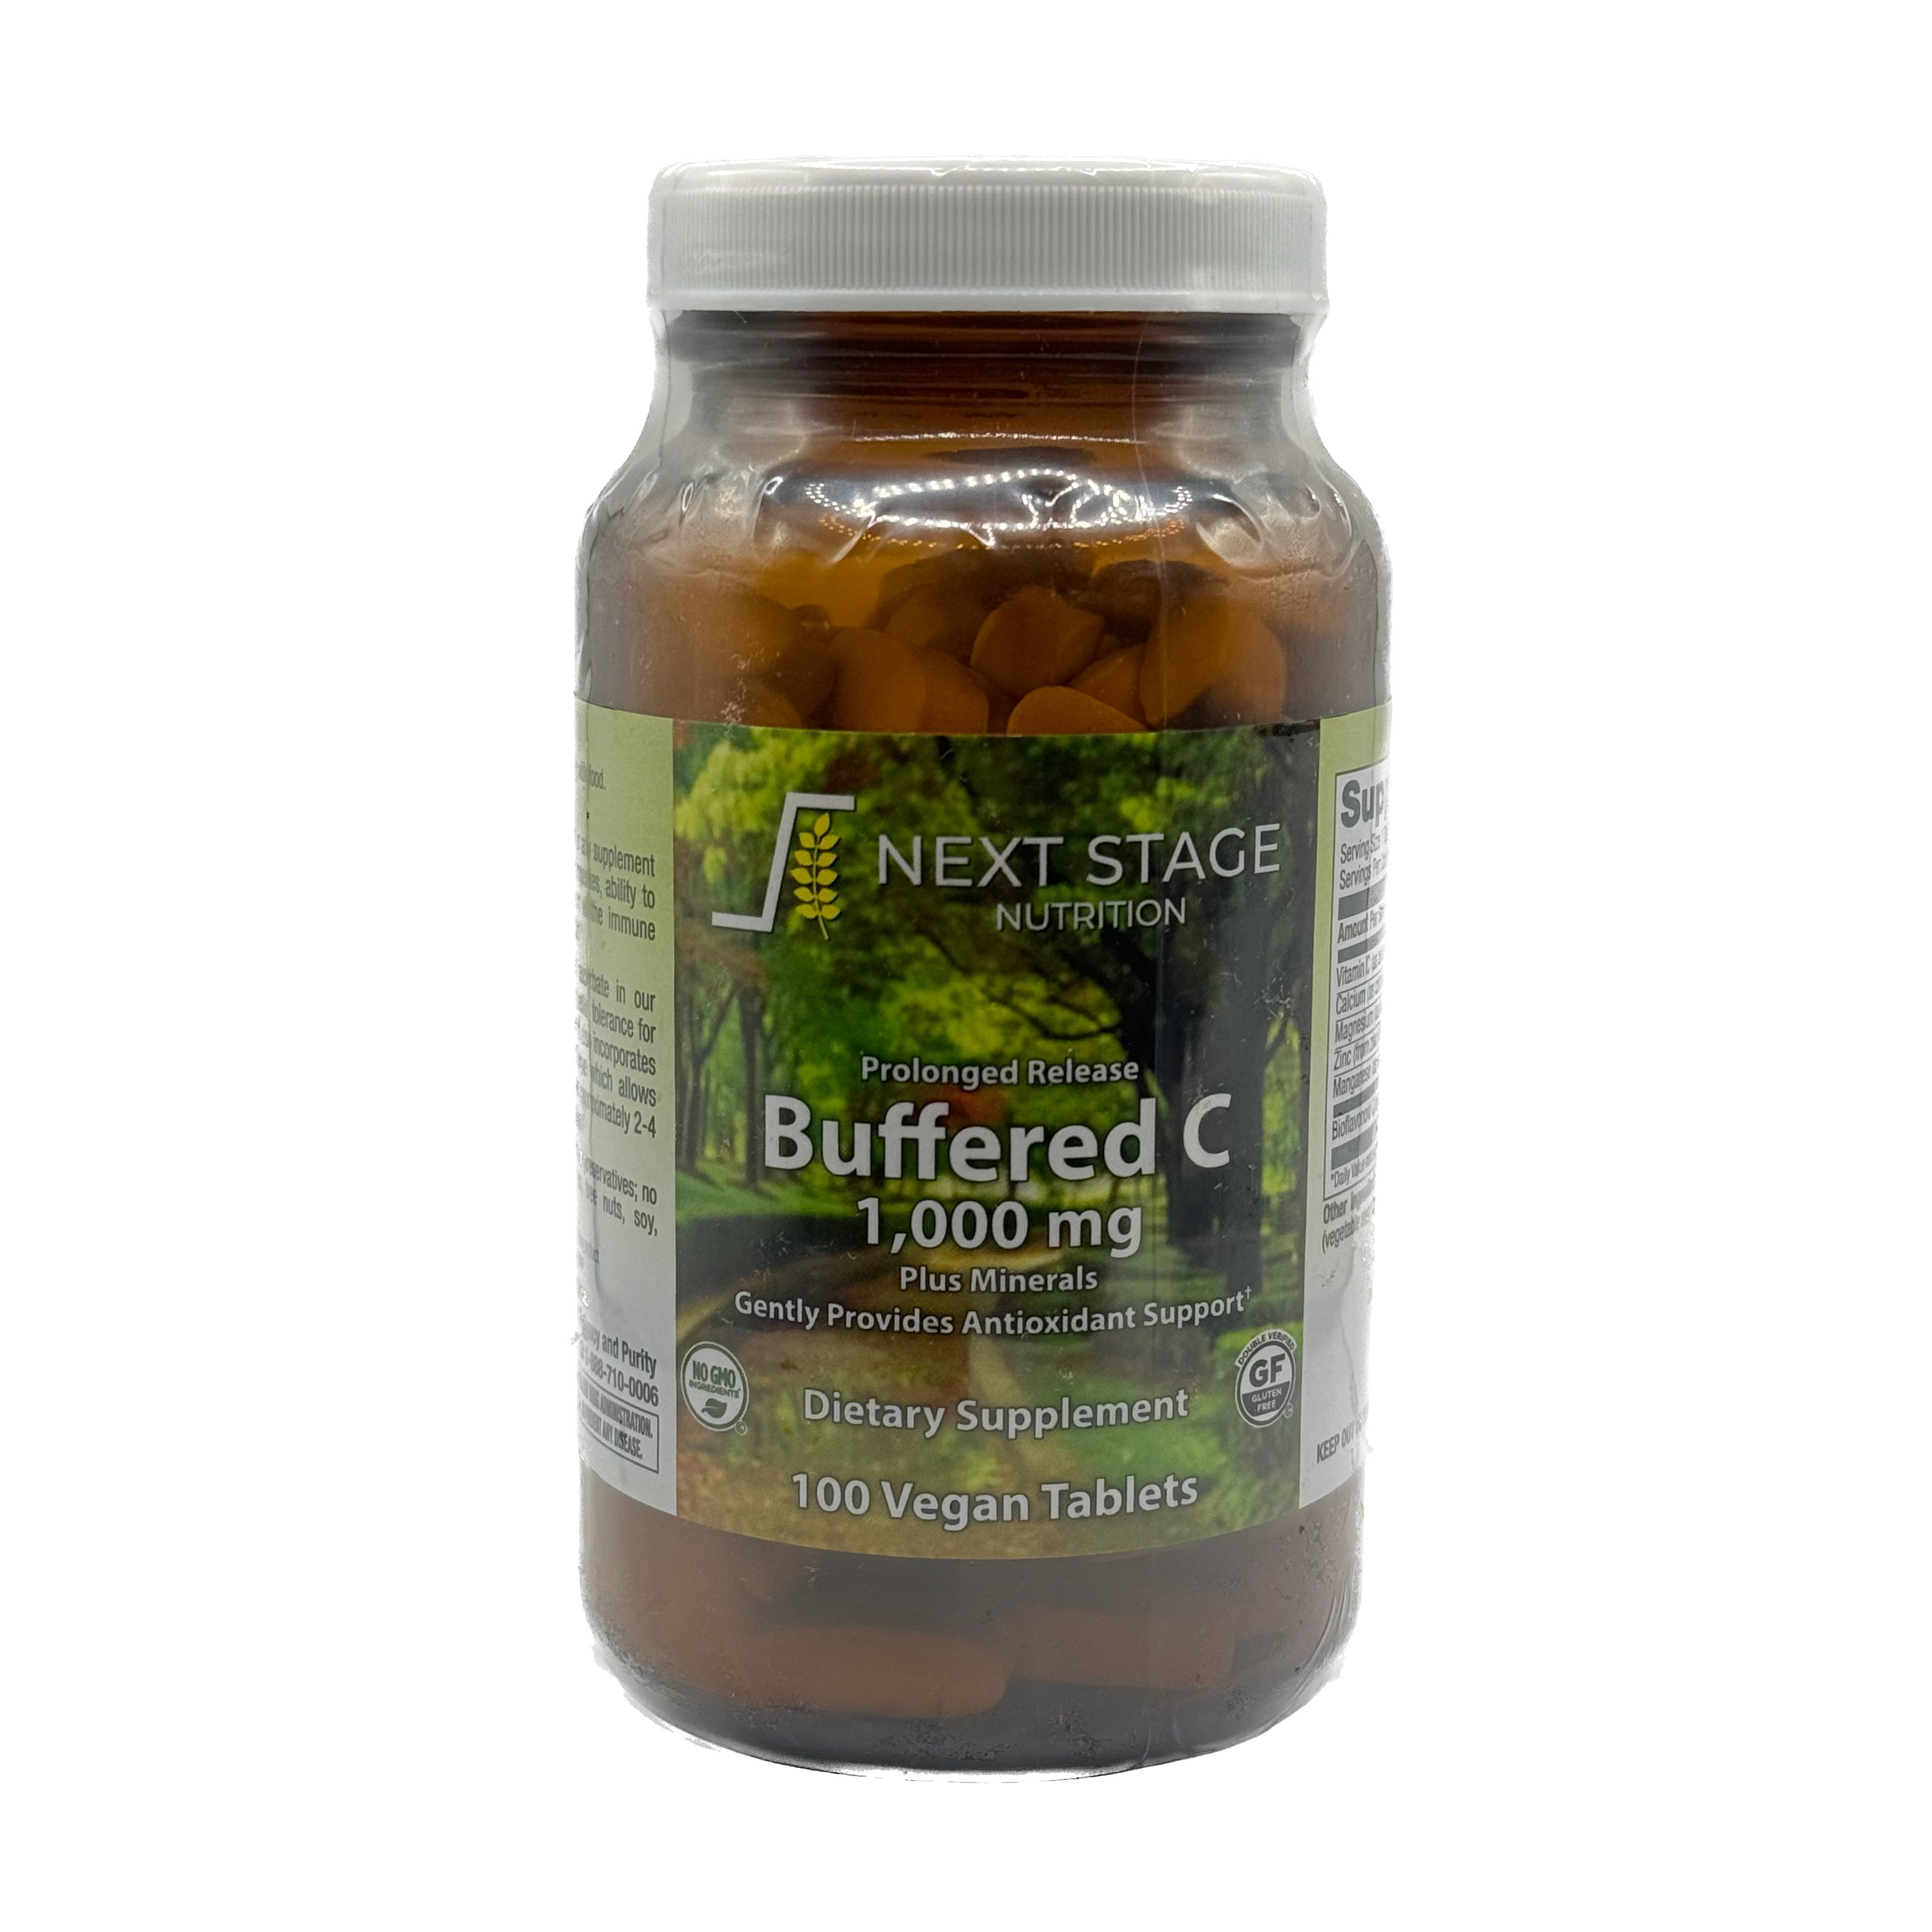 Next Stage Buffered C 1,000 mg Plus Minerals